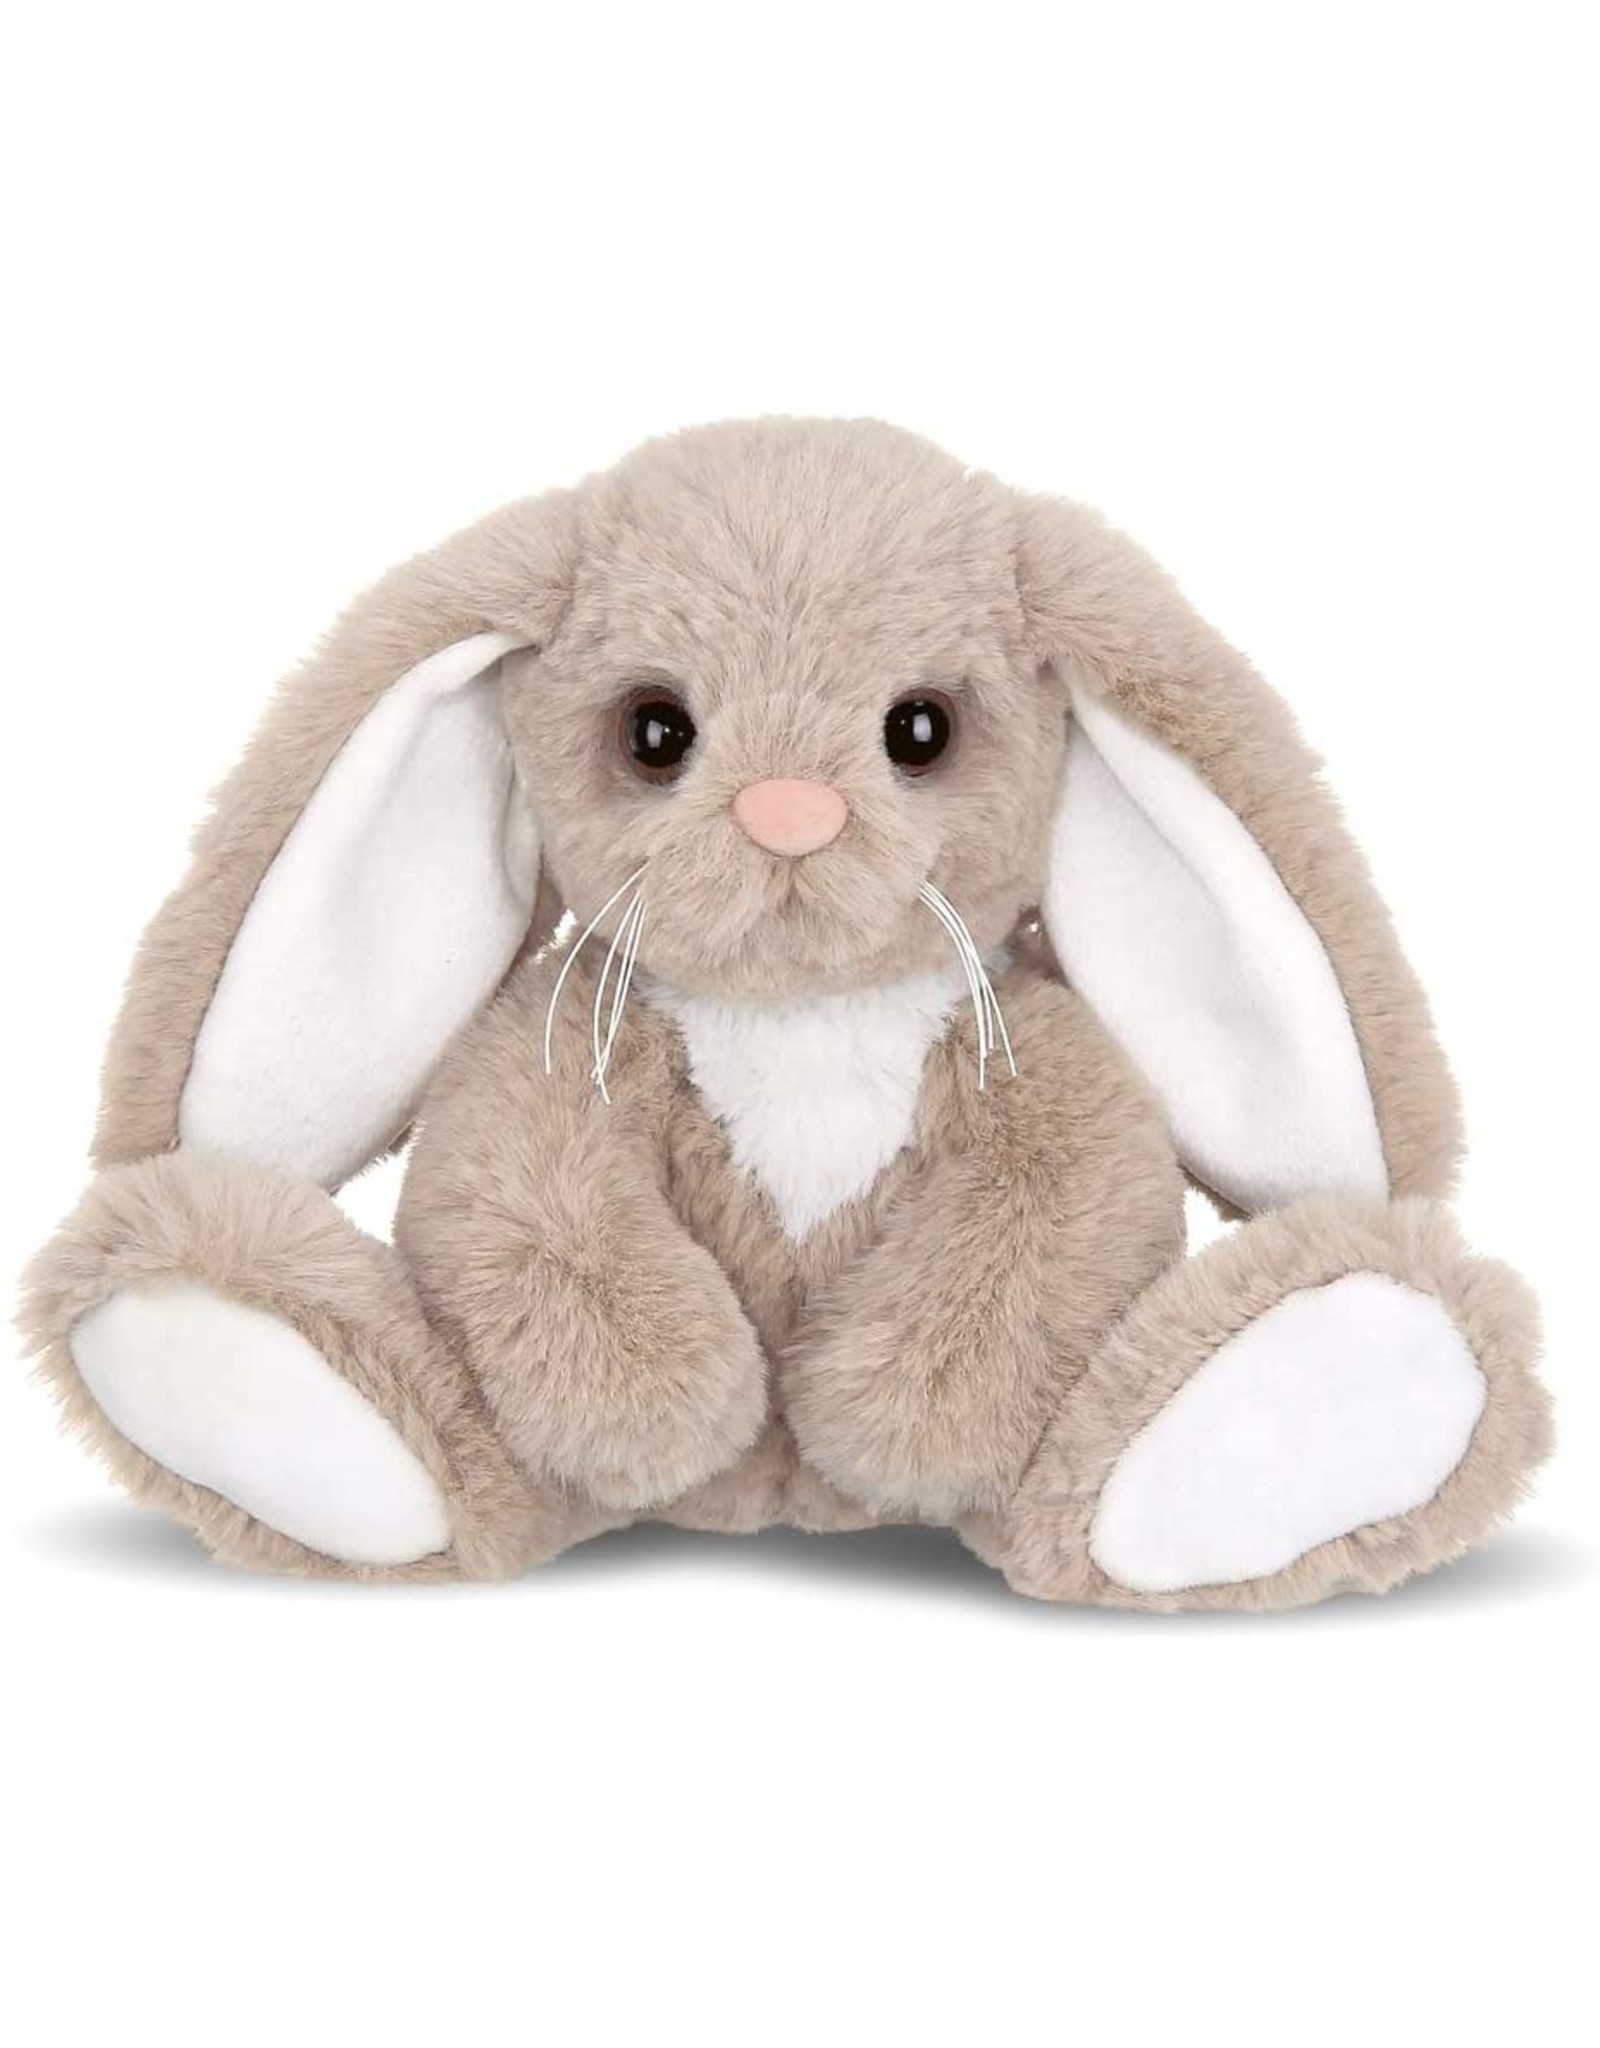 Lil' Boomer the Taupe & White Bunny Plush